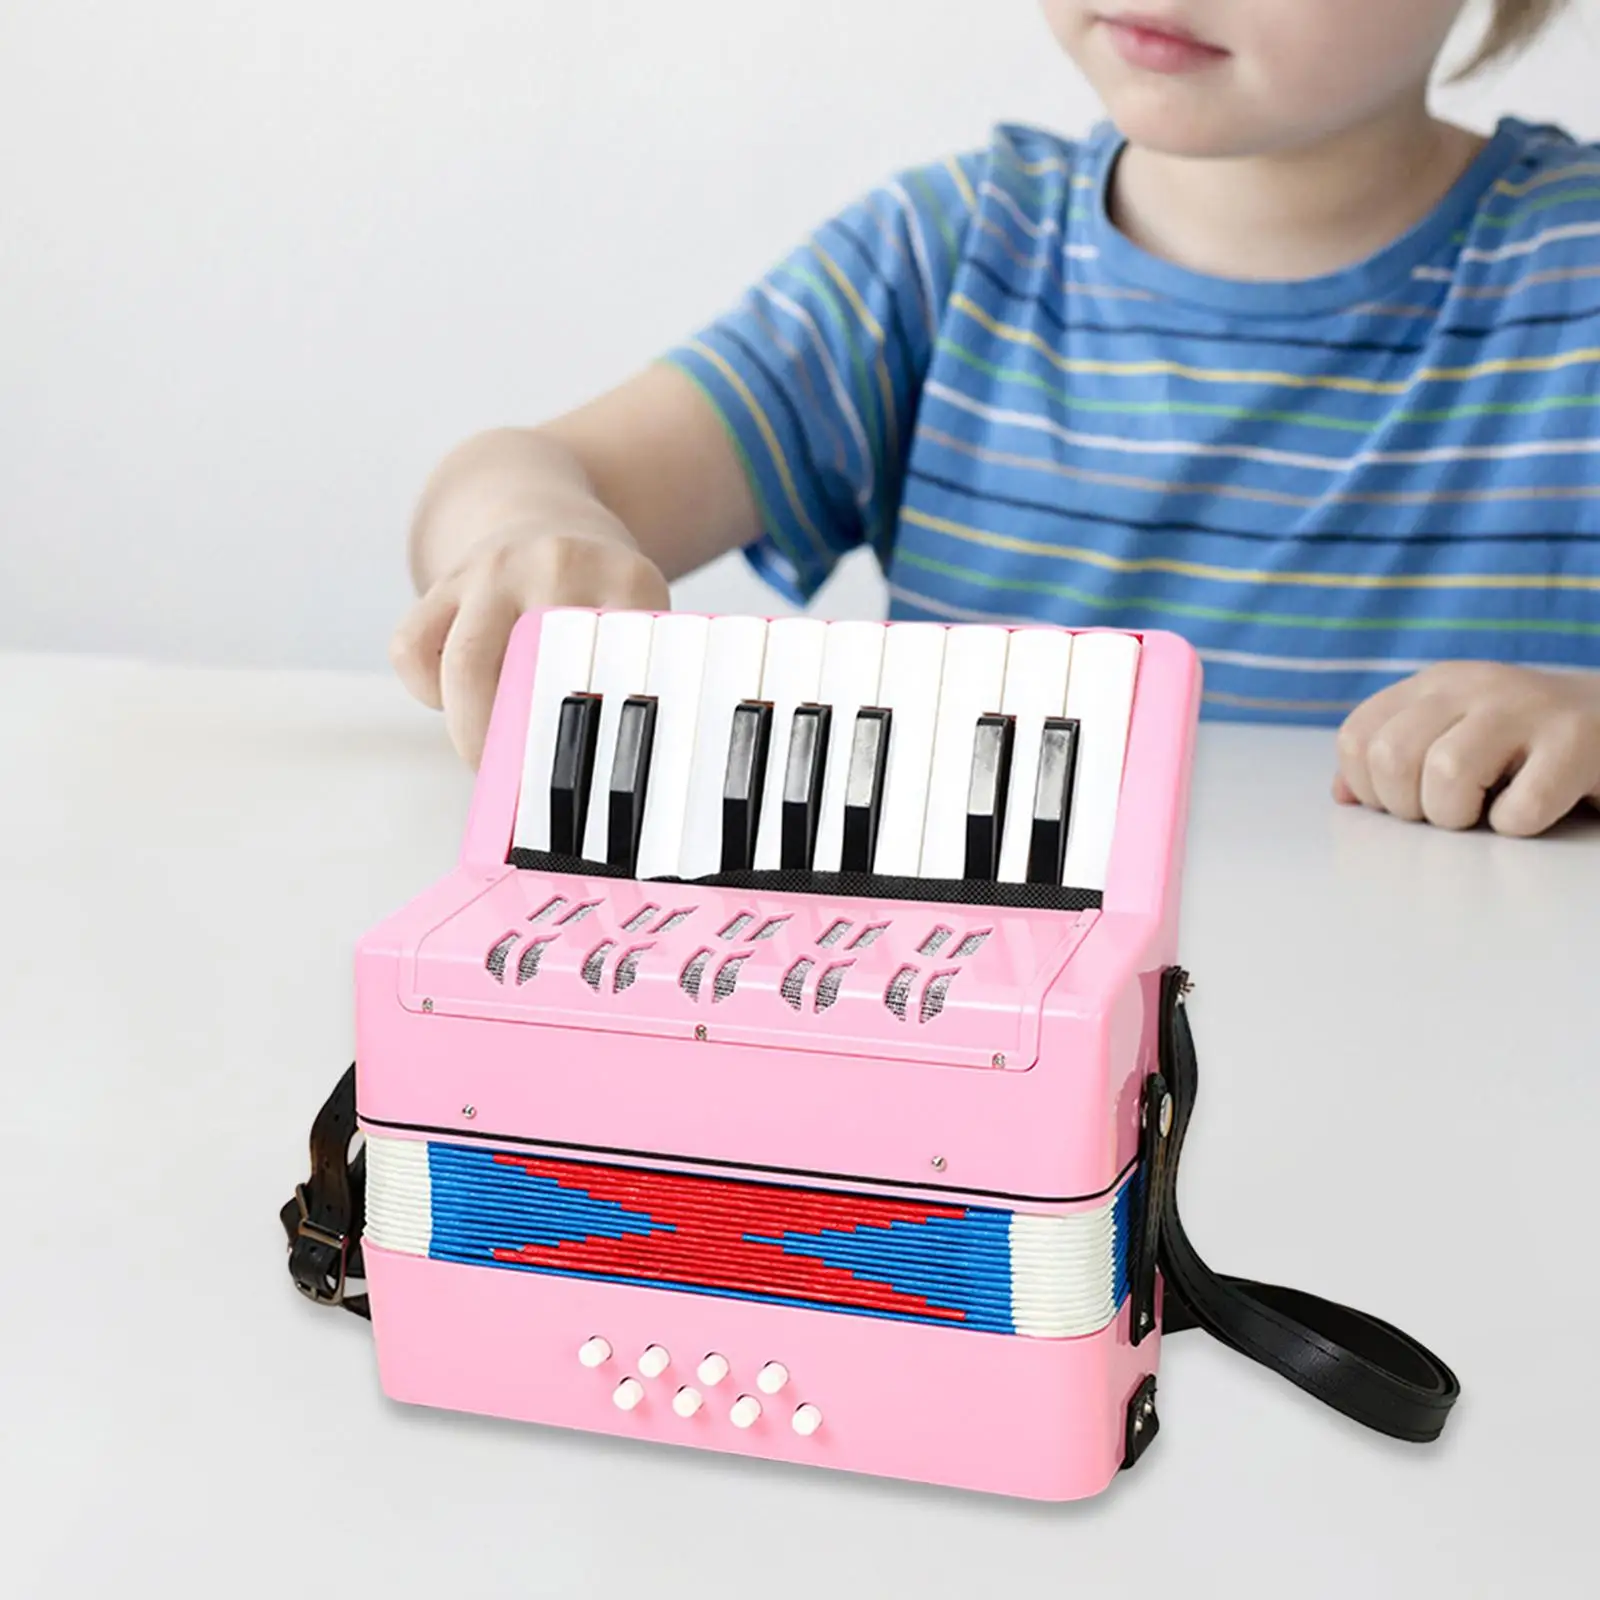 17 Keys 8 Bass Piano Accordion Hand Eye Coordination Educational Musical Toys for Boys Girls Amateur Music Lovers Beginner